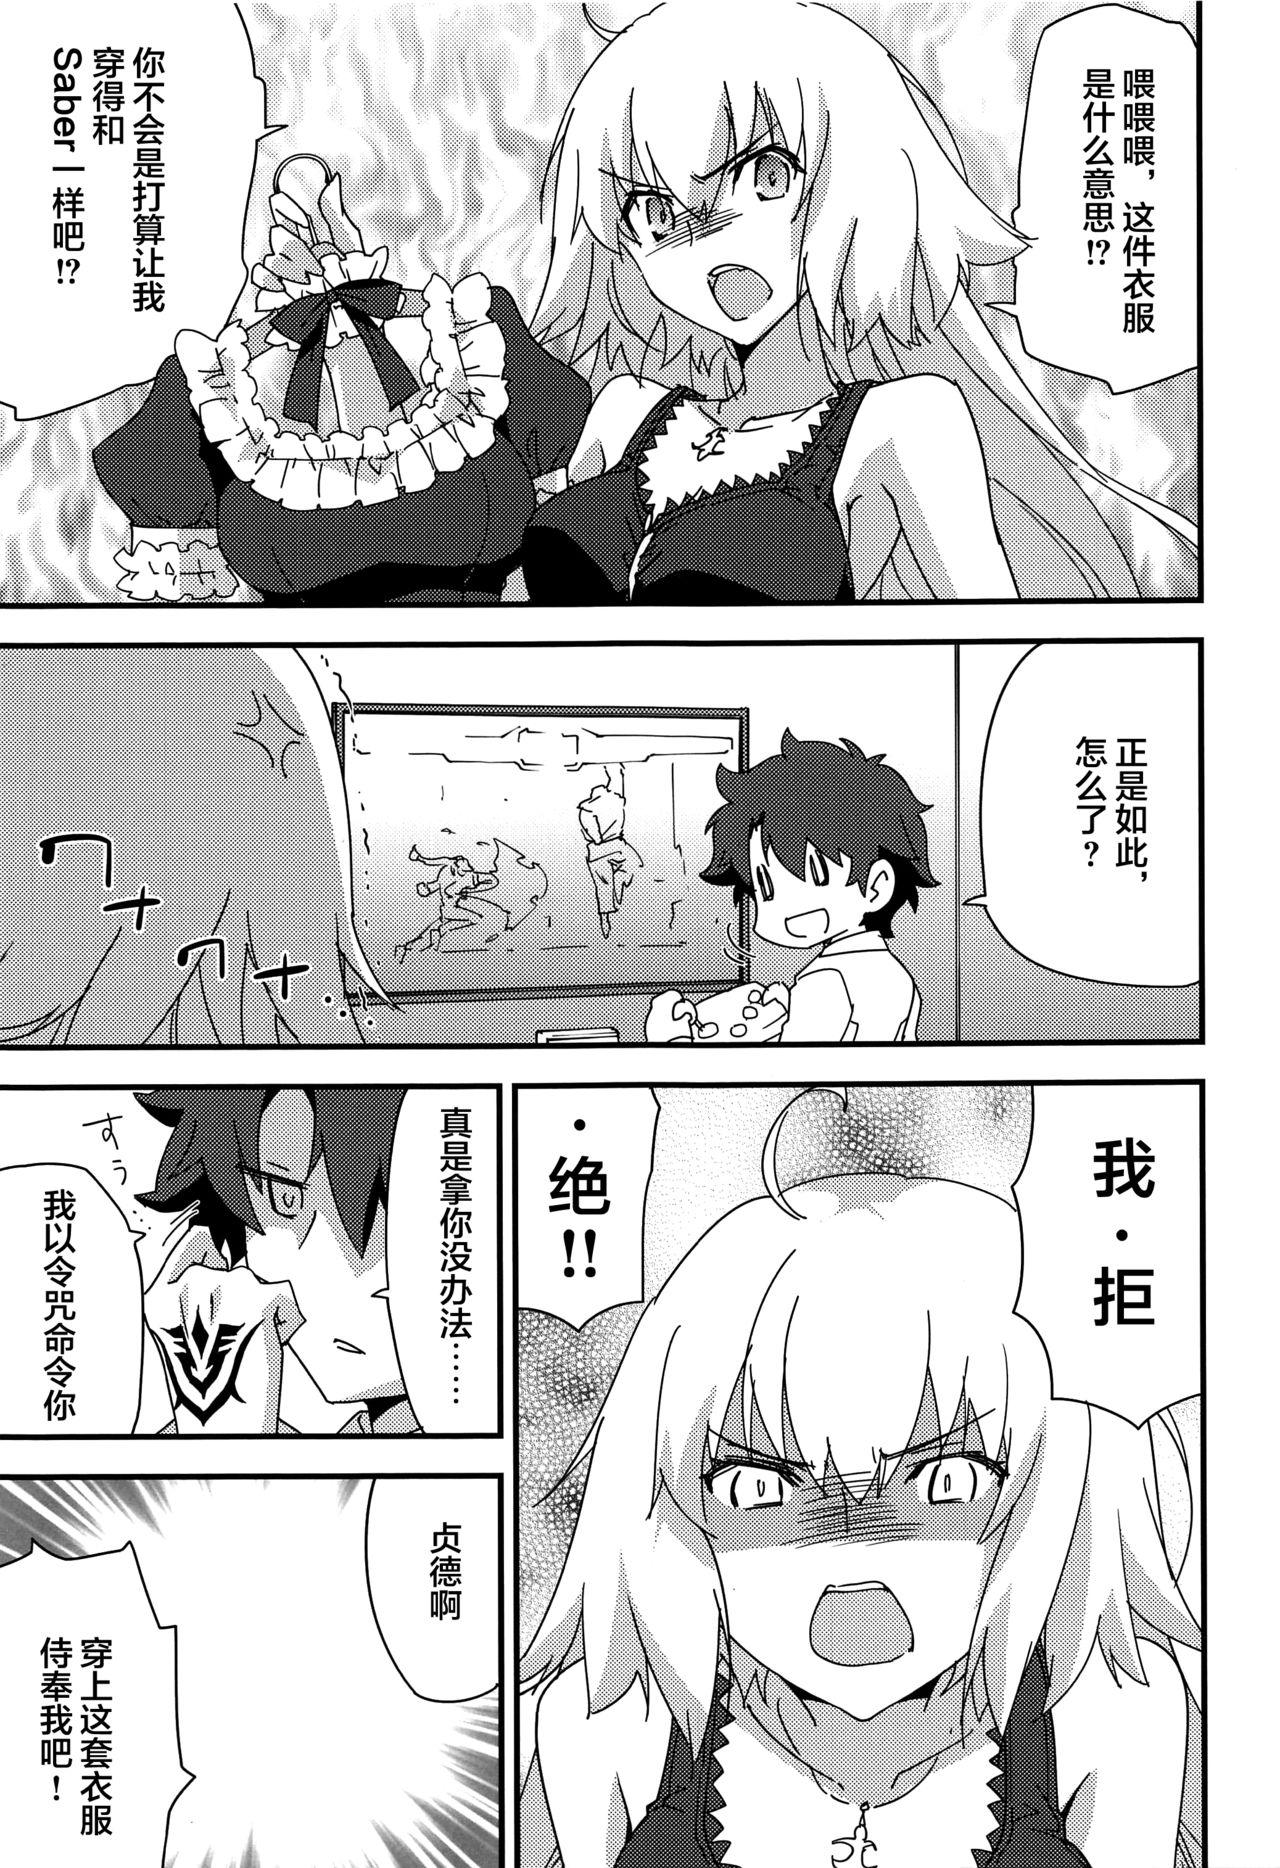 Celebrities Gohoushi Maid Jeanne-chan - Fate grand order Amazing - Page 4